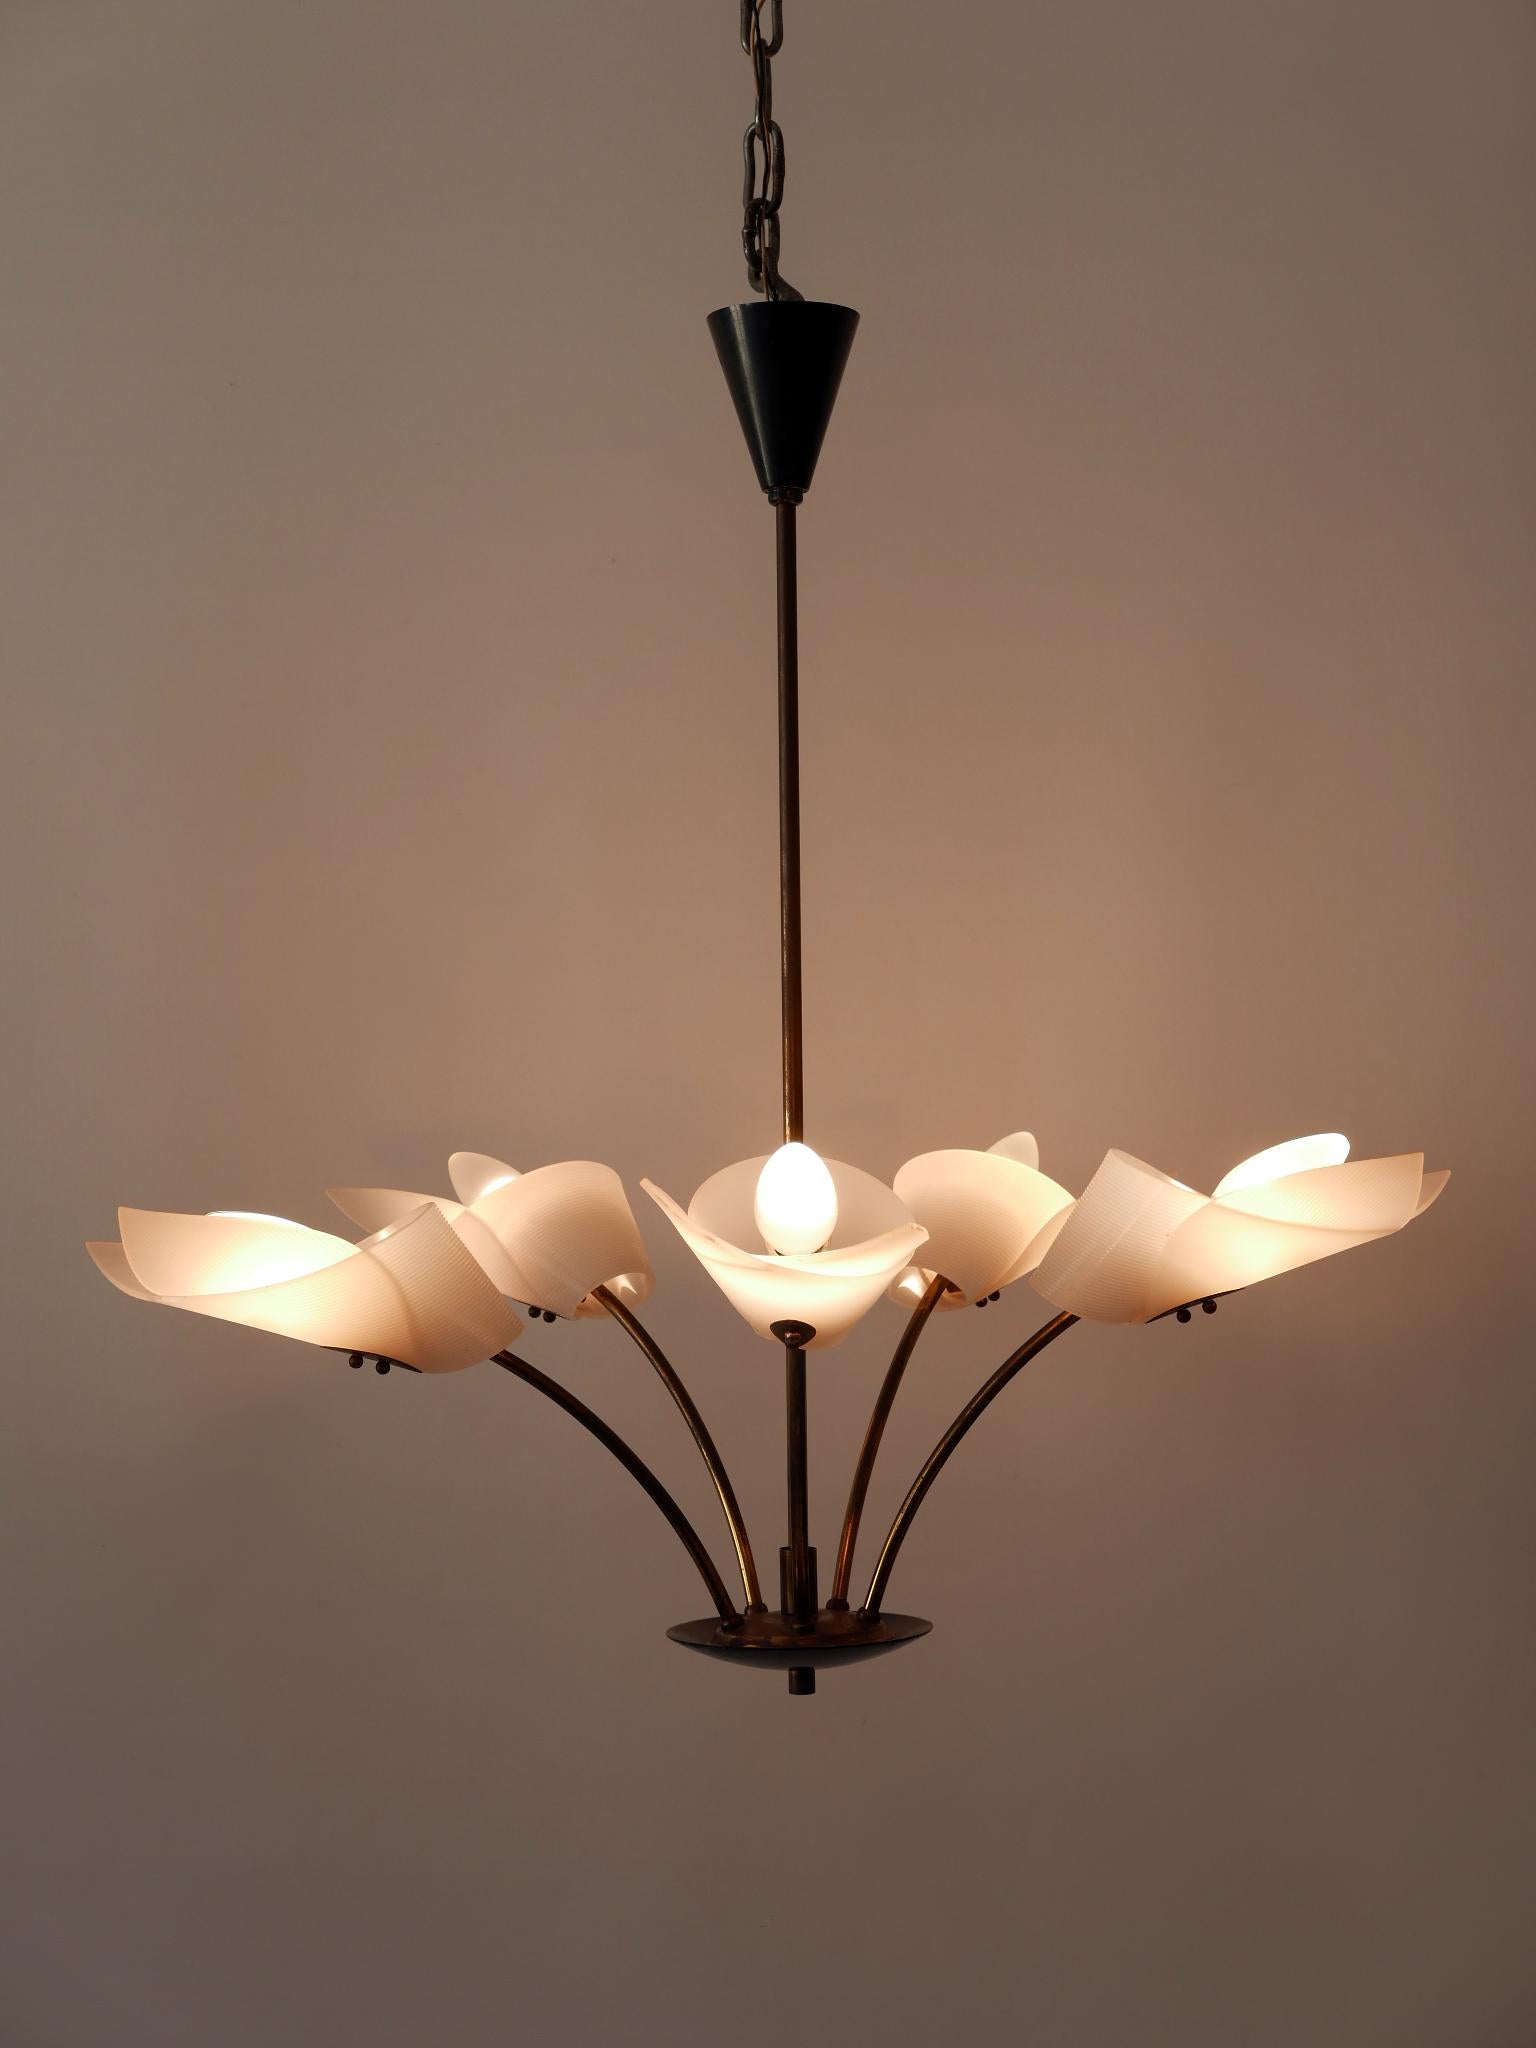 Brass Lovely Mid-Century Modern Fived-Armed Chandelier or Pendant Lamp Germany 1950s For Sale